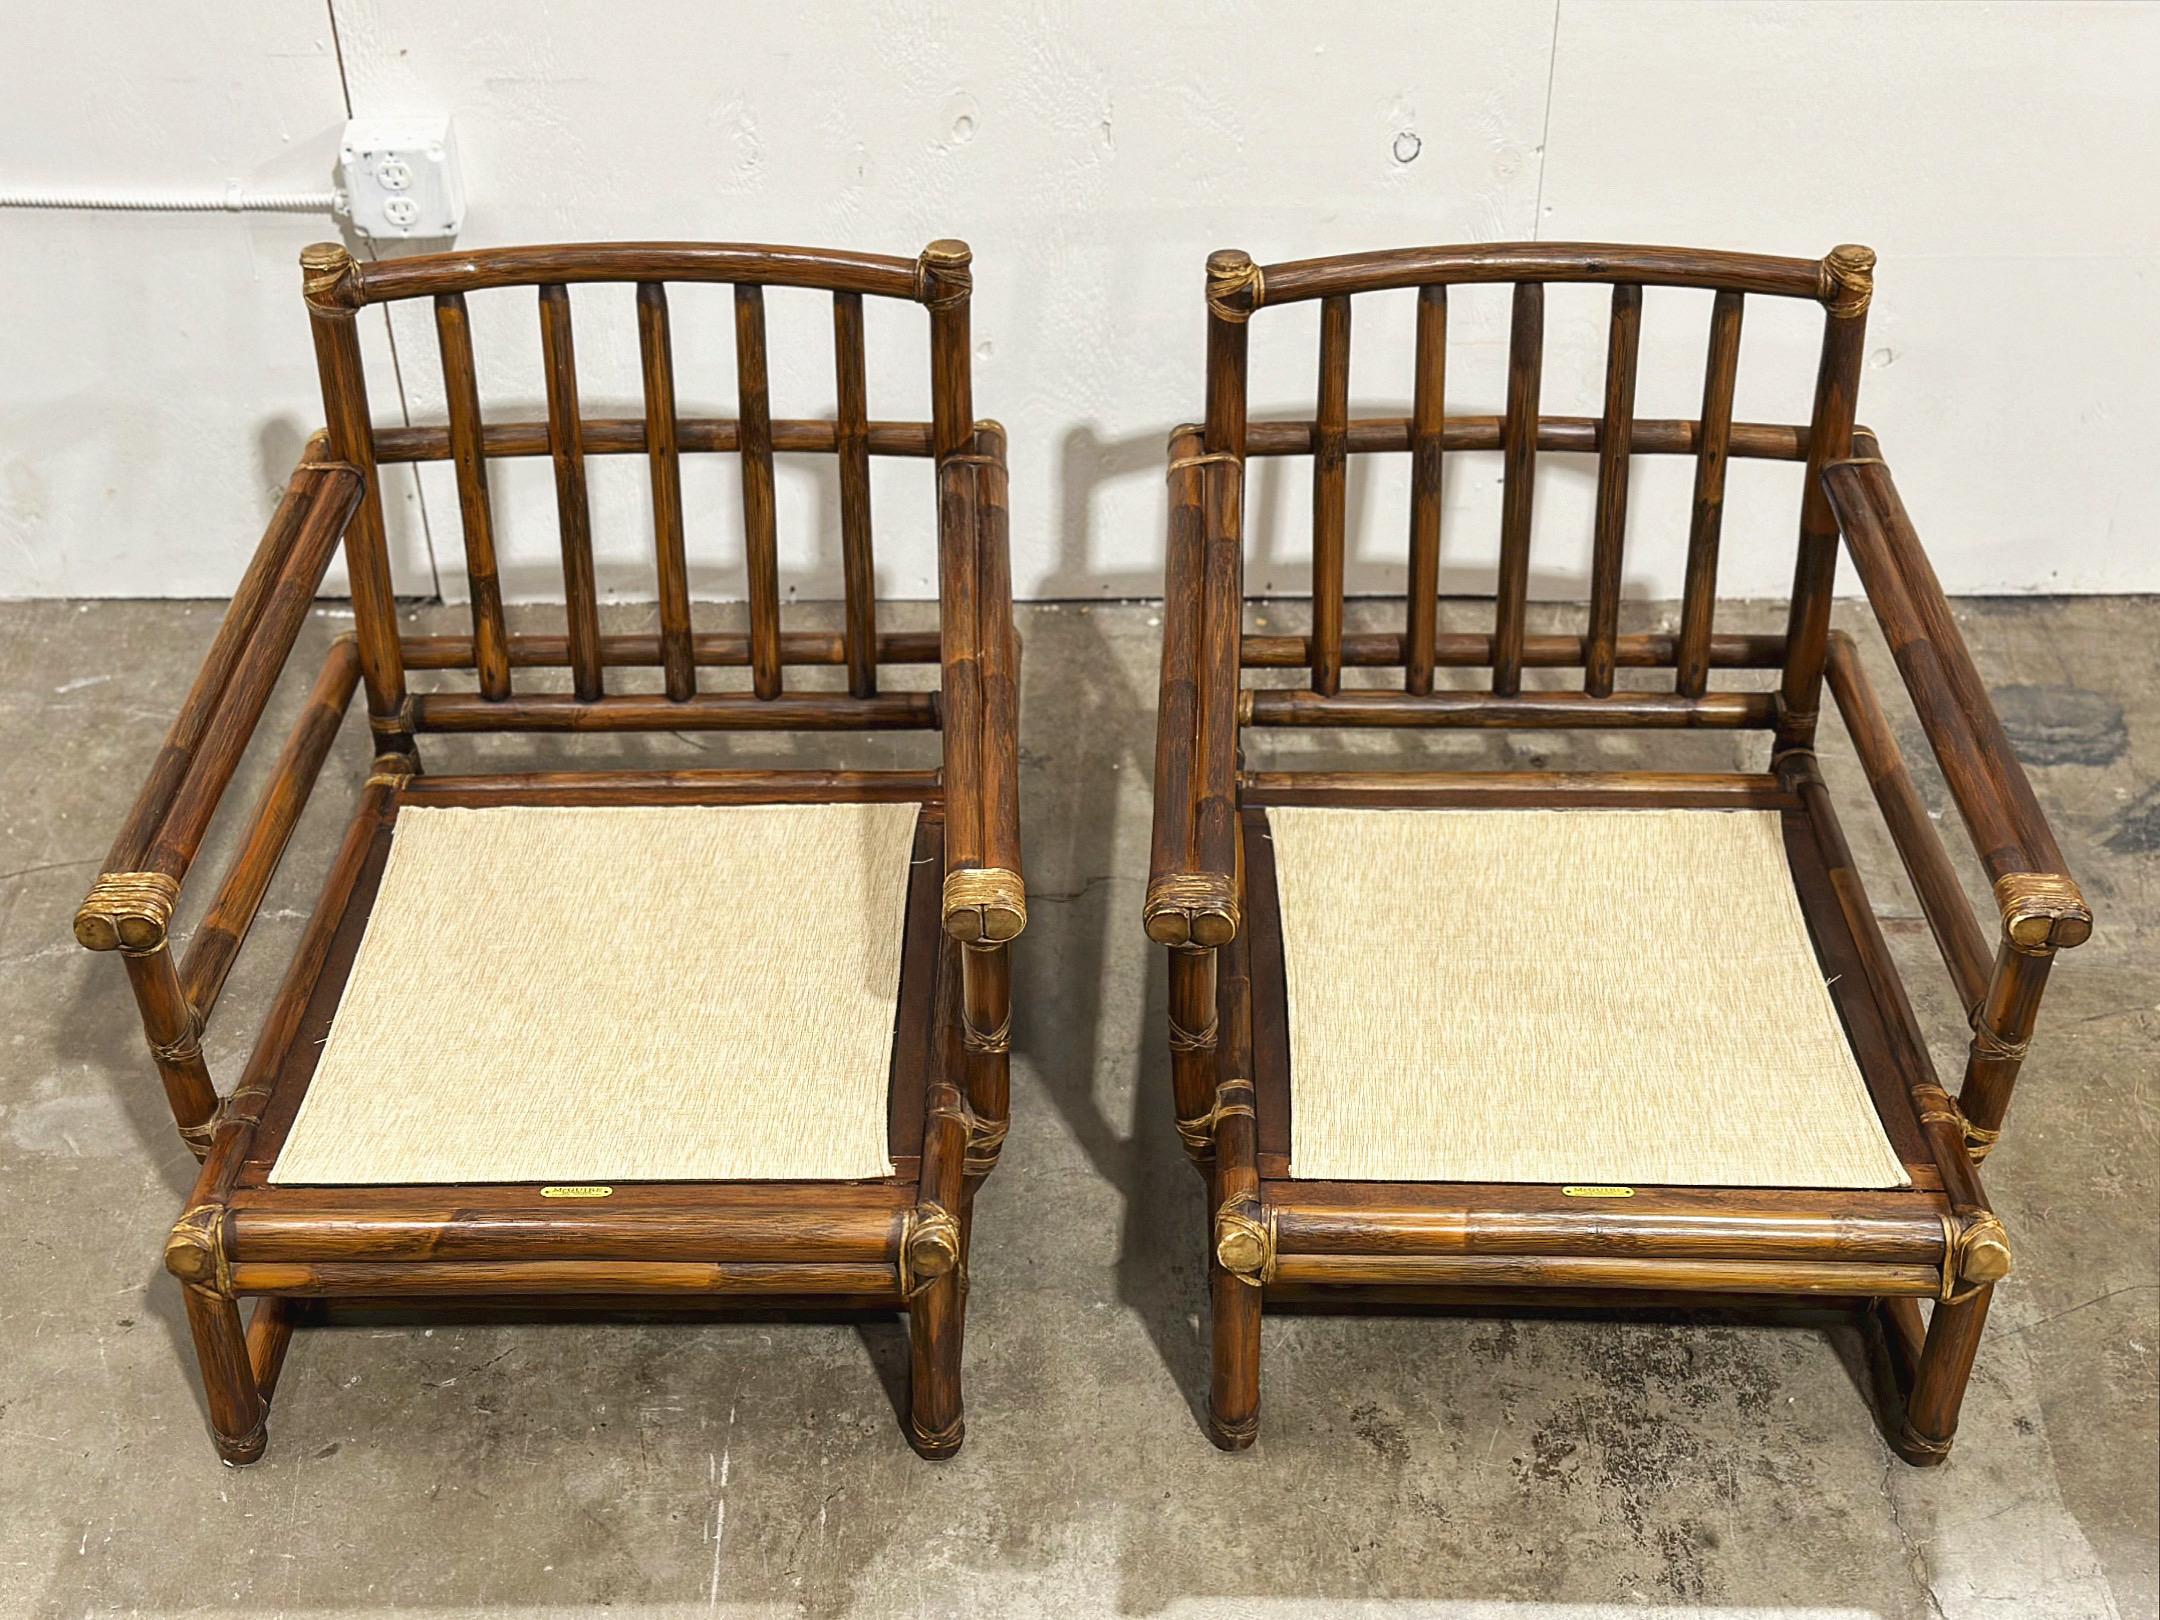 Pair McGuire Midcentury Organic Modern Oversized Rattan Leather Lounge Chairs 7